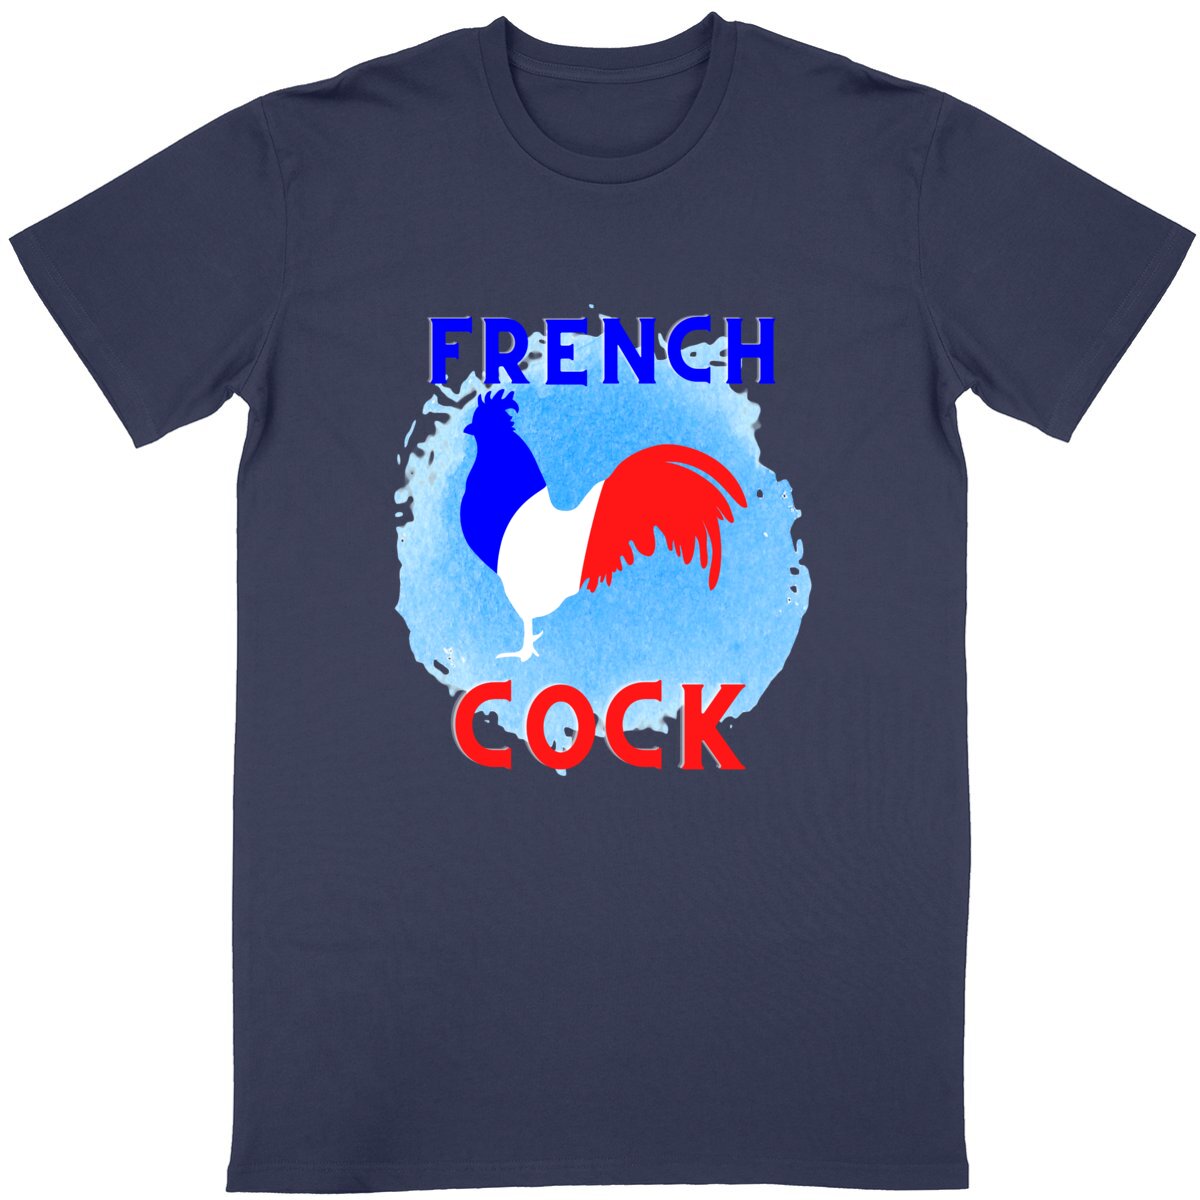 T-shirt "French Cock"